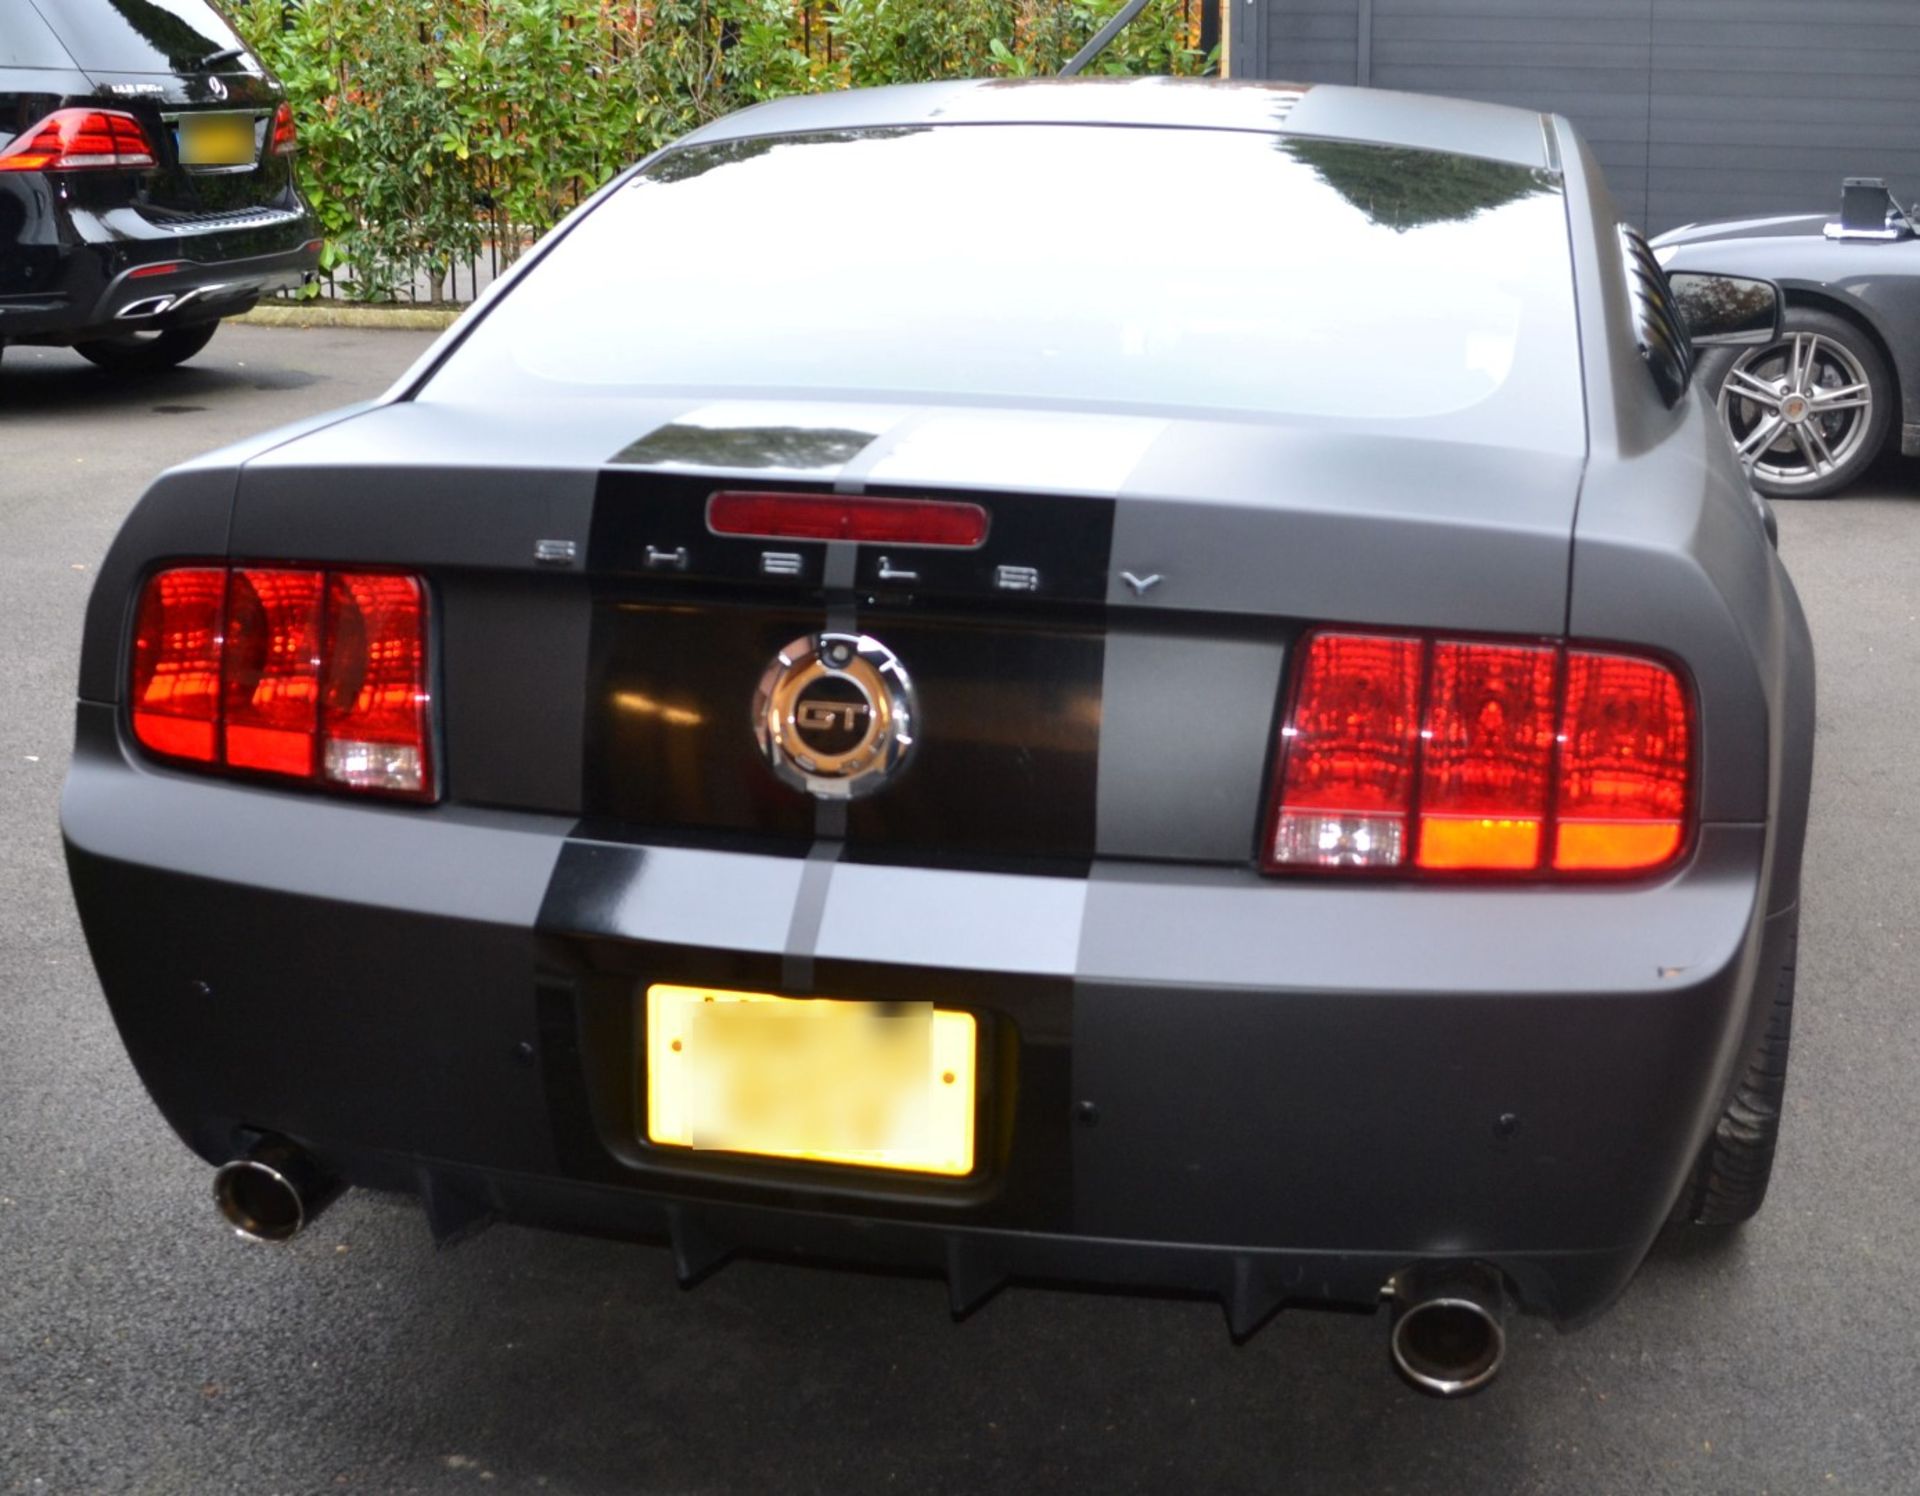 Limited Edition Supercharged 2008 Shelby Ford Mustang GT-C - 2136 Miles - No VAT on the hammer - Image 10 of 64